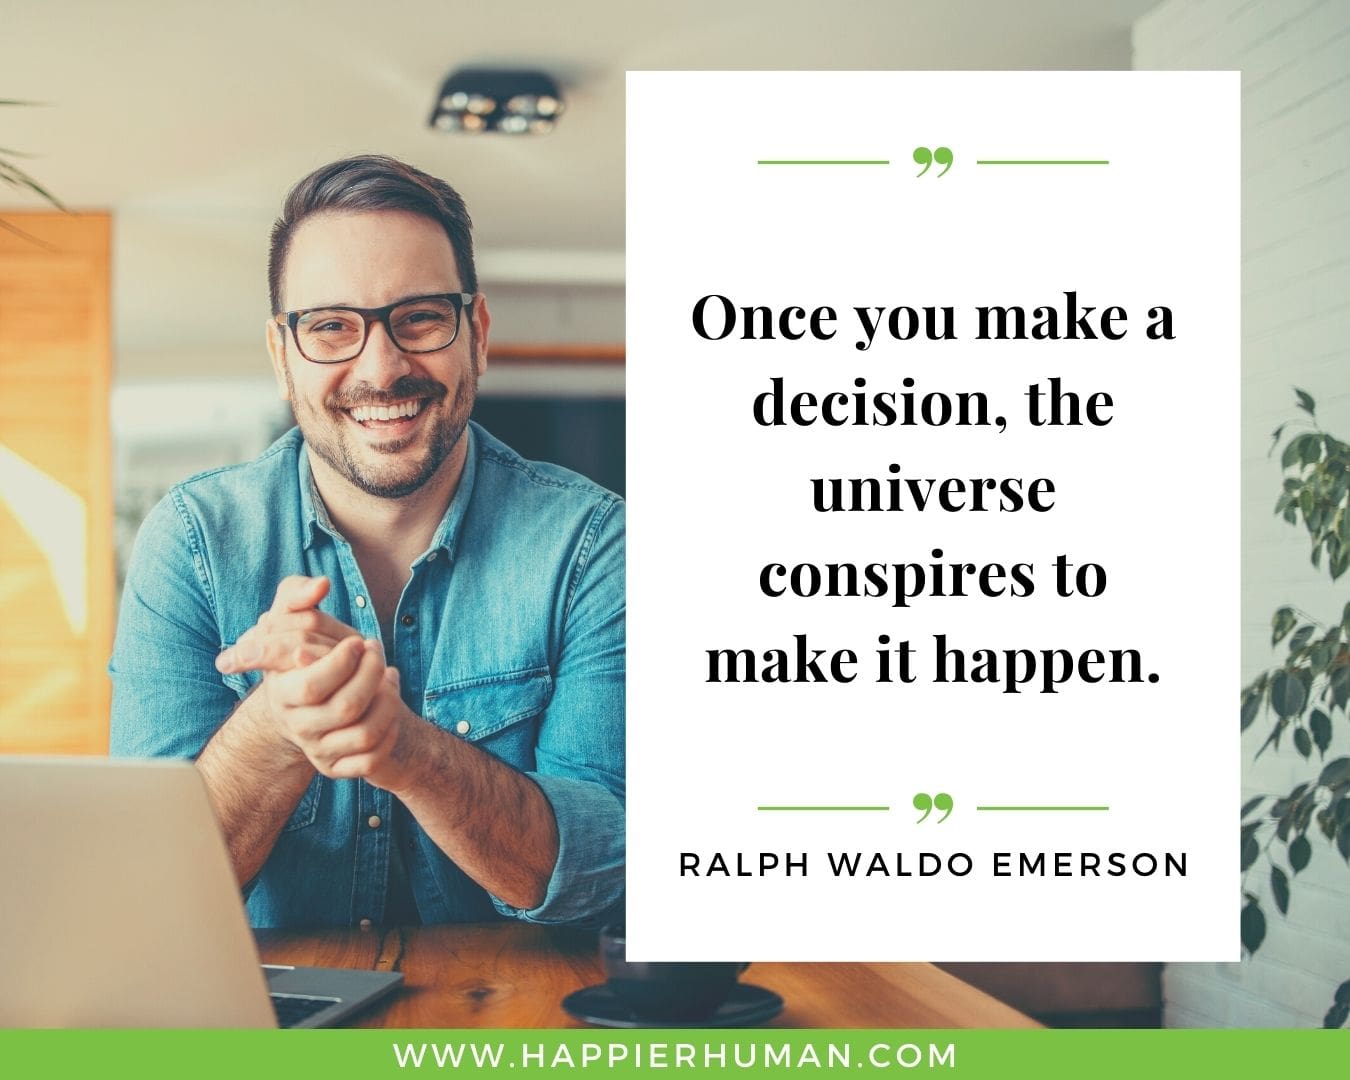 Positive Energy Quotes - “Once you make a decision, the universe conspires to make it happen.” - Ralph Waldo Emerson